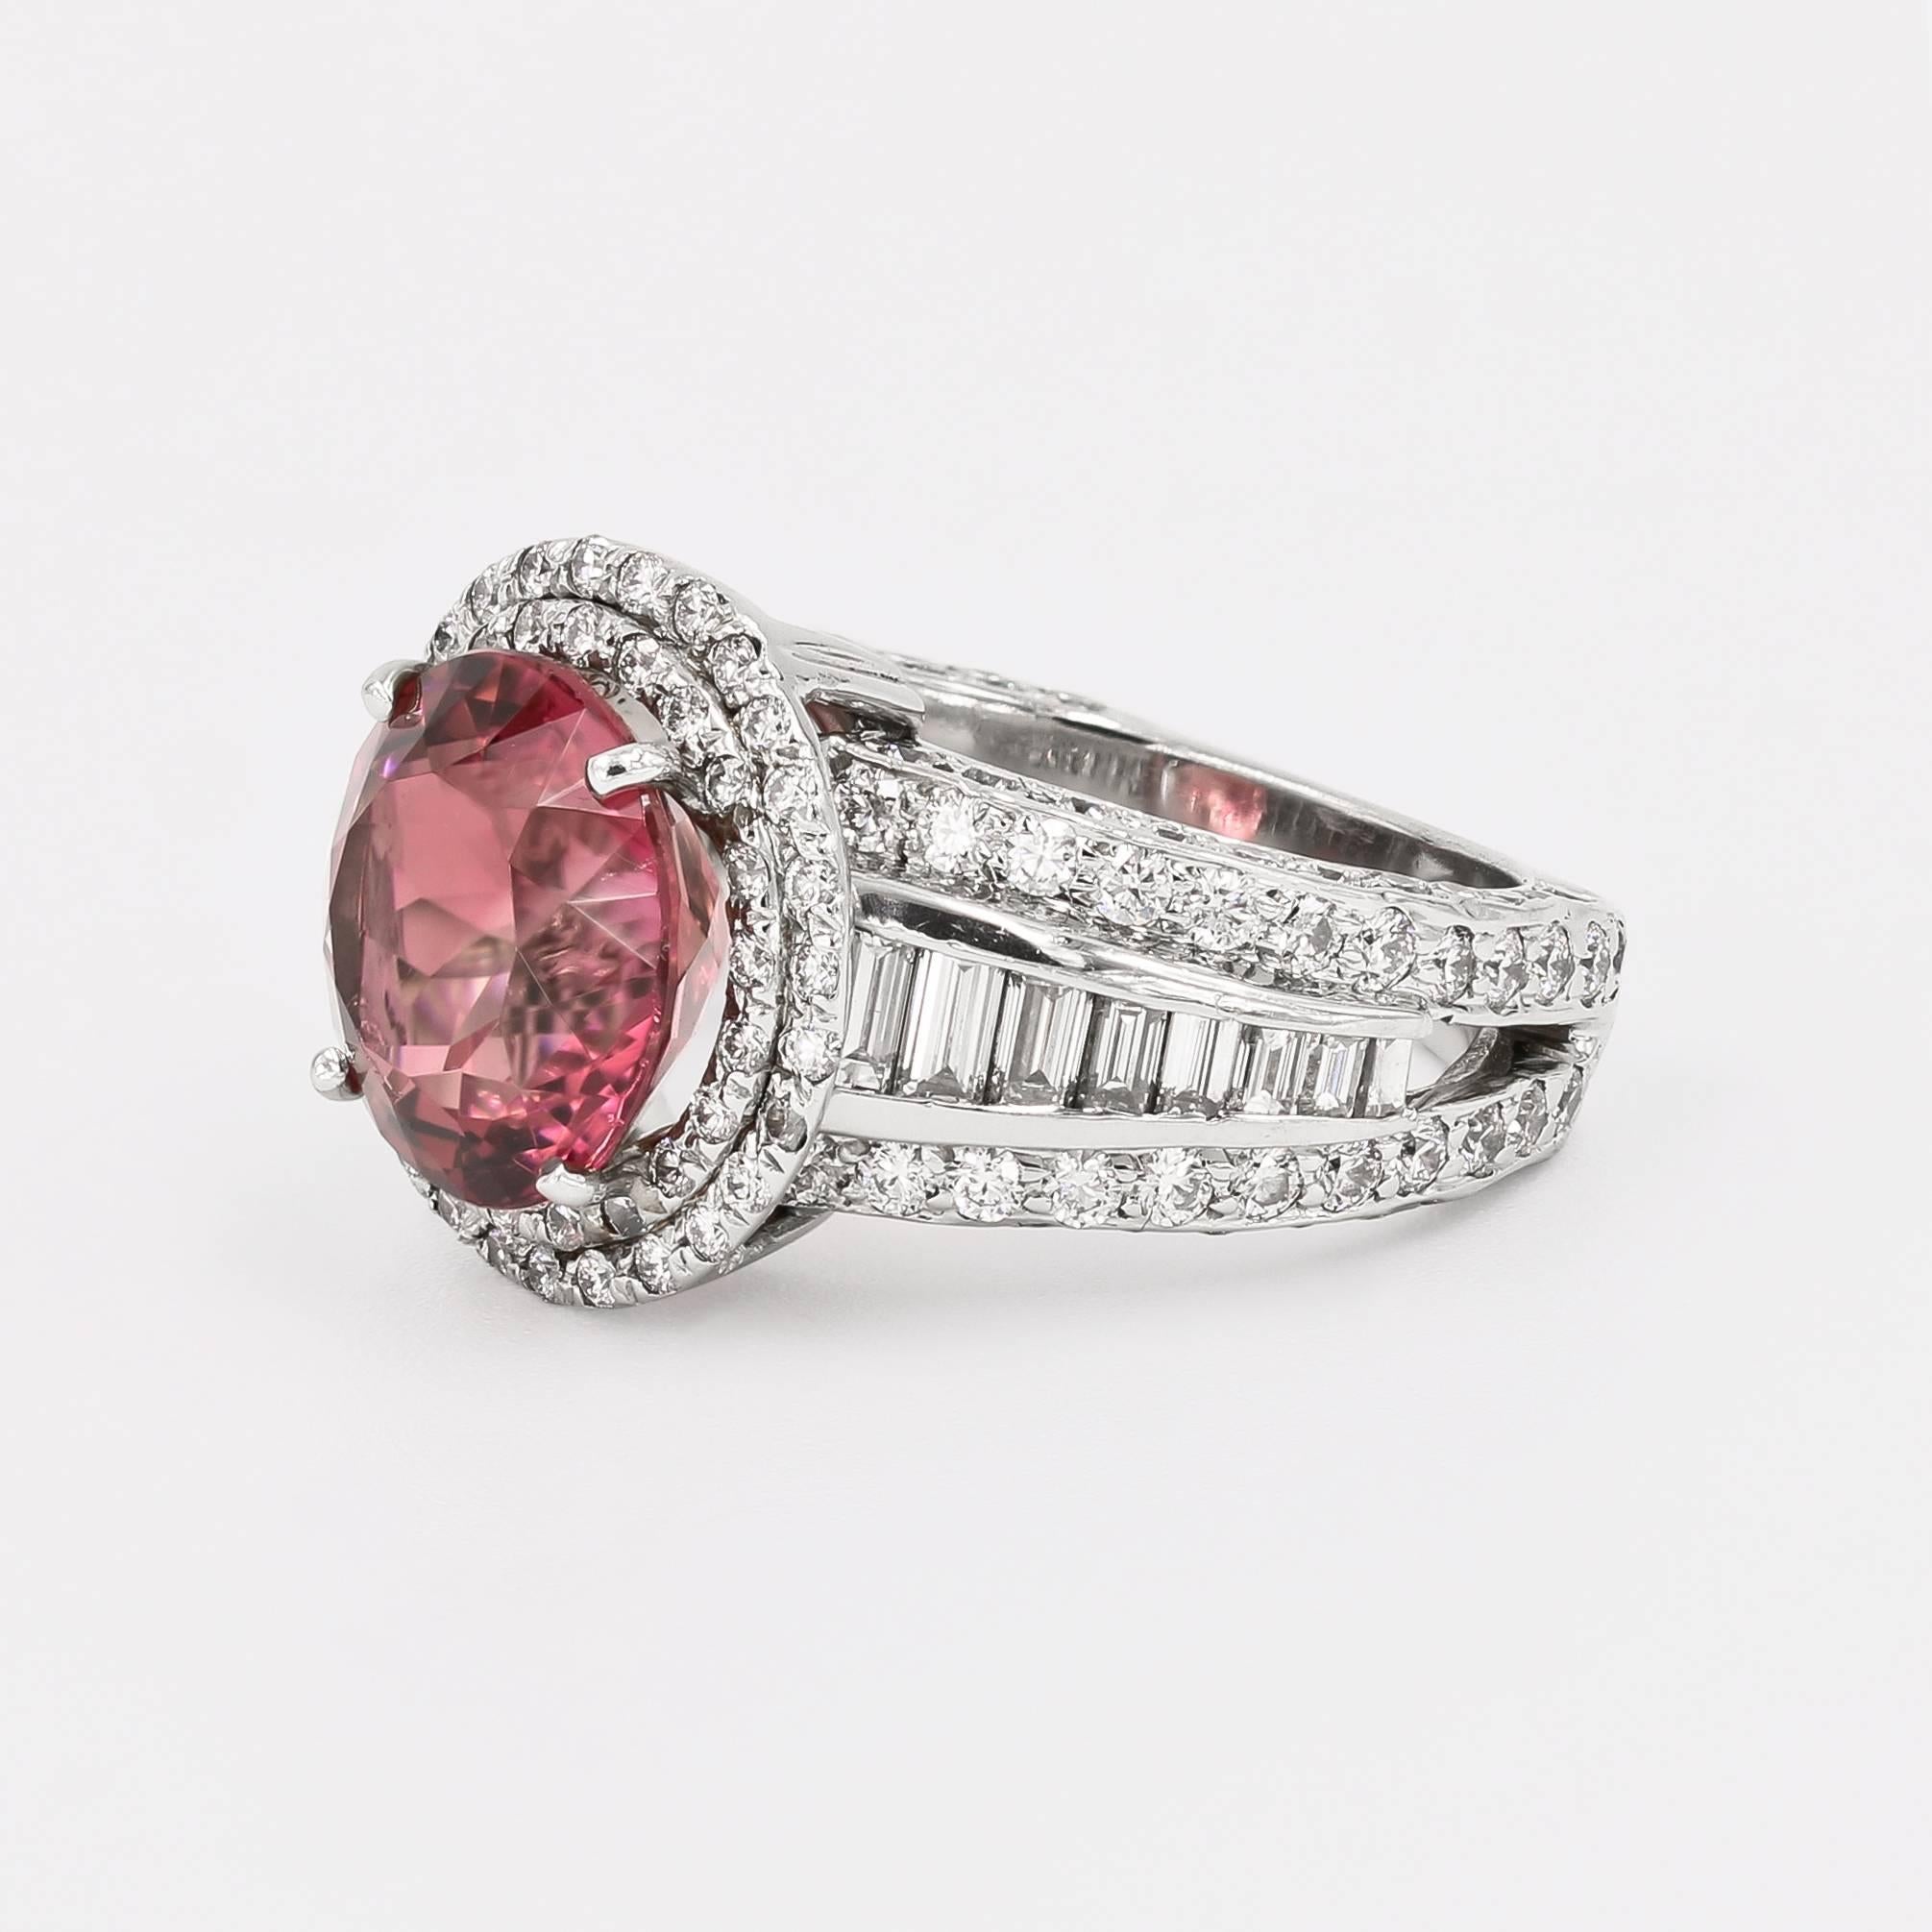 This impressive platinum ring contains a 5.10cts. round natural pink tourmaline center set in a double halo style setting. An abundance of diamonds accompany the center- 141 ideal cut round diamonds= 1.60cts. t.w. and 16 baguettes = .85ct. t.w.